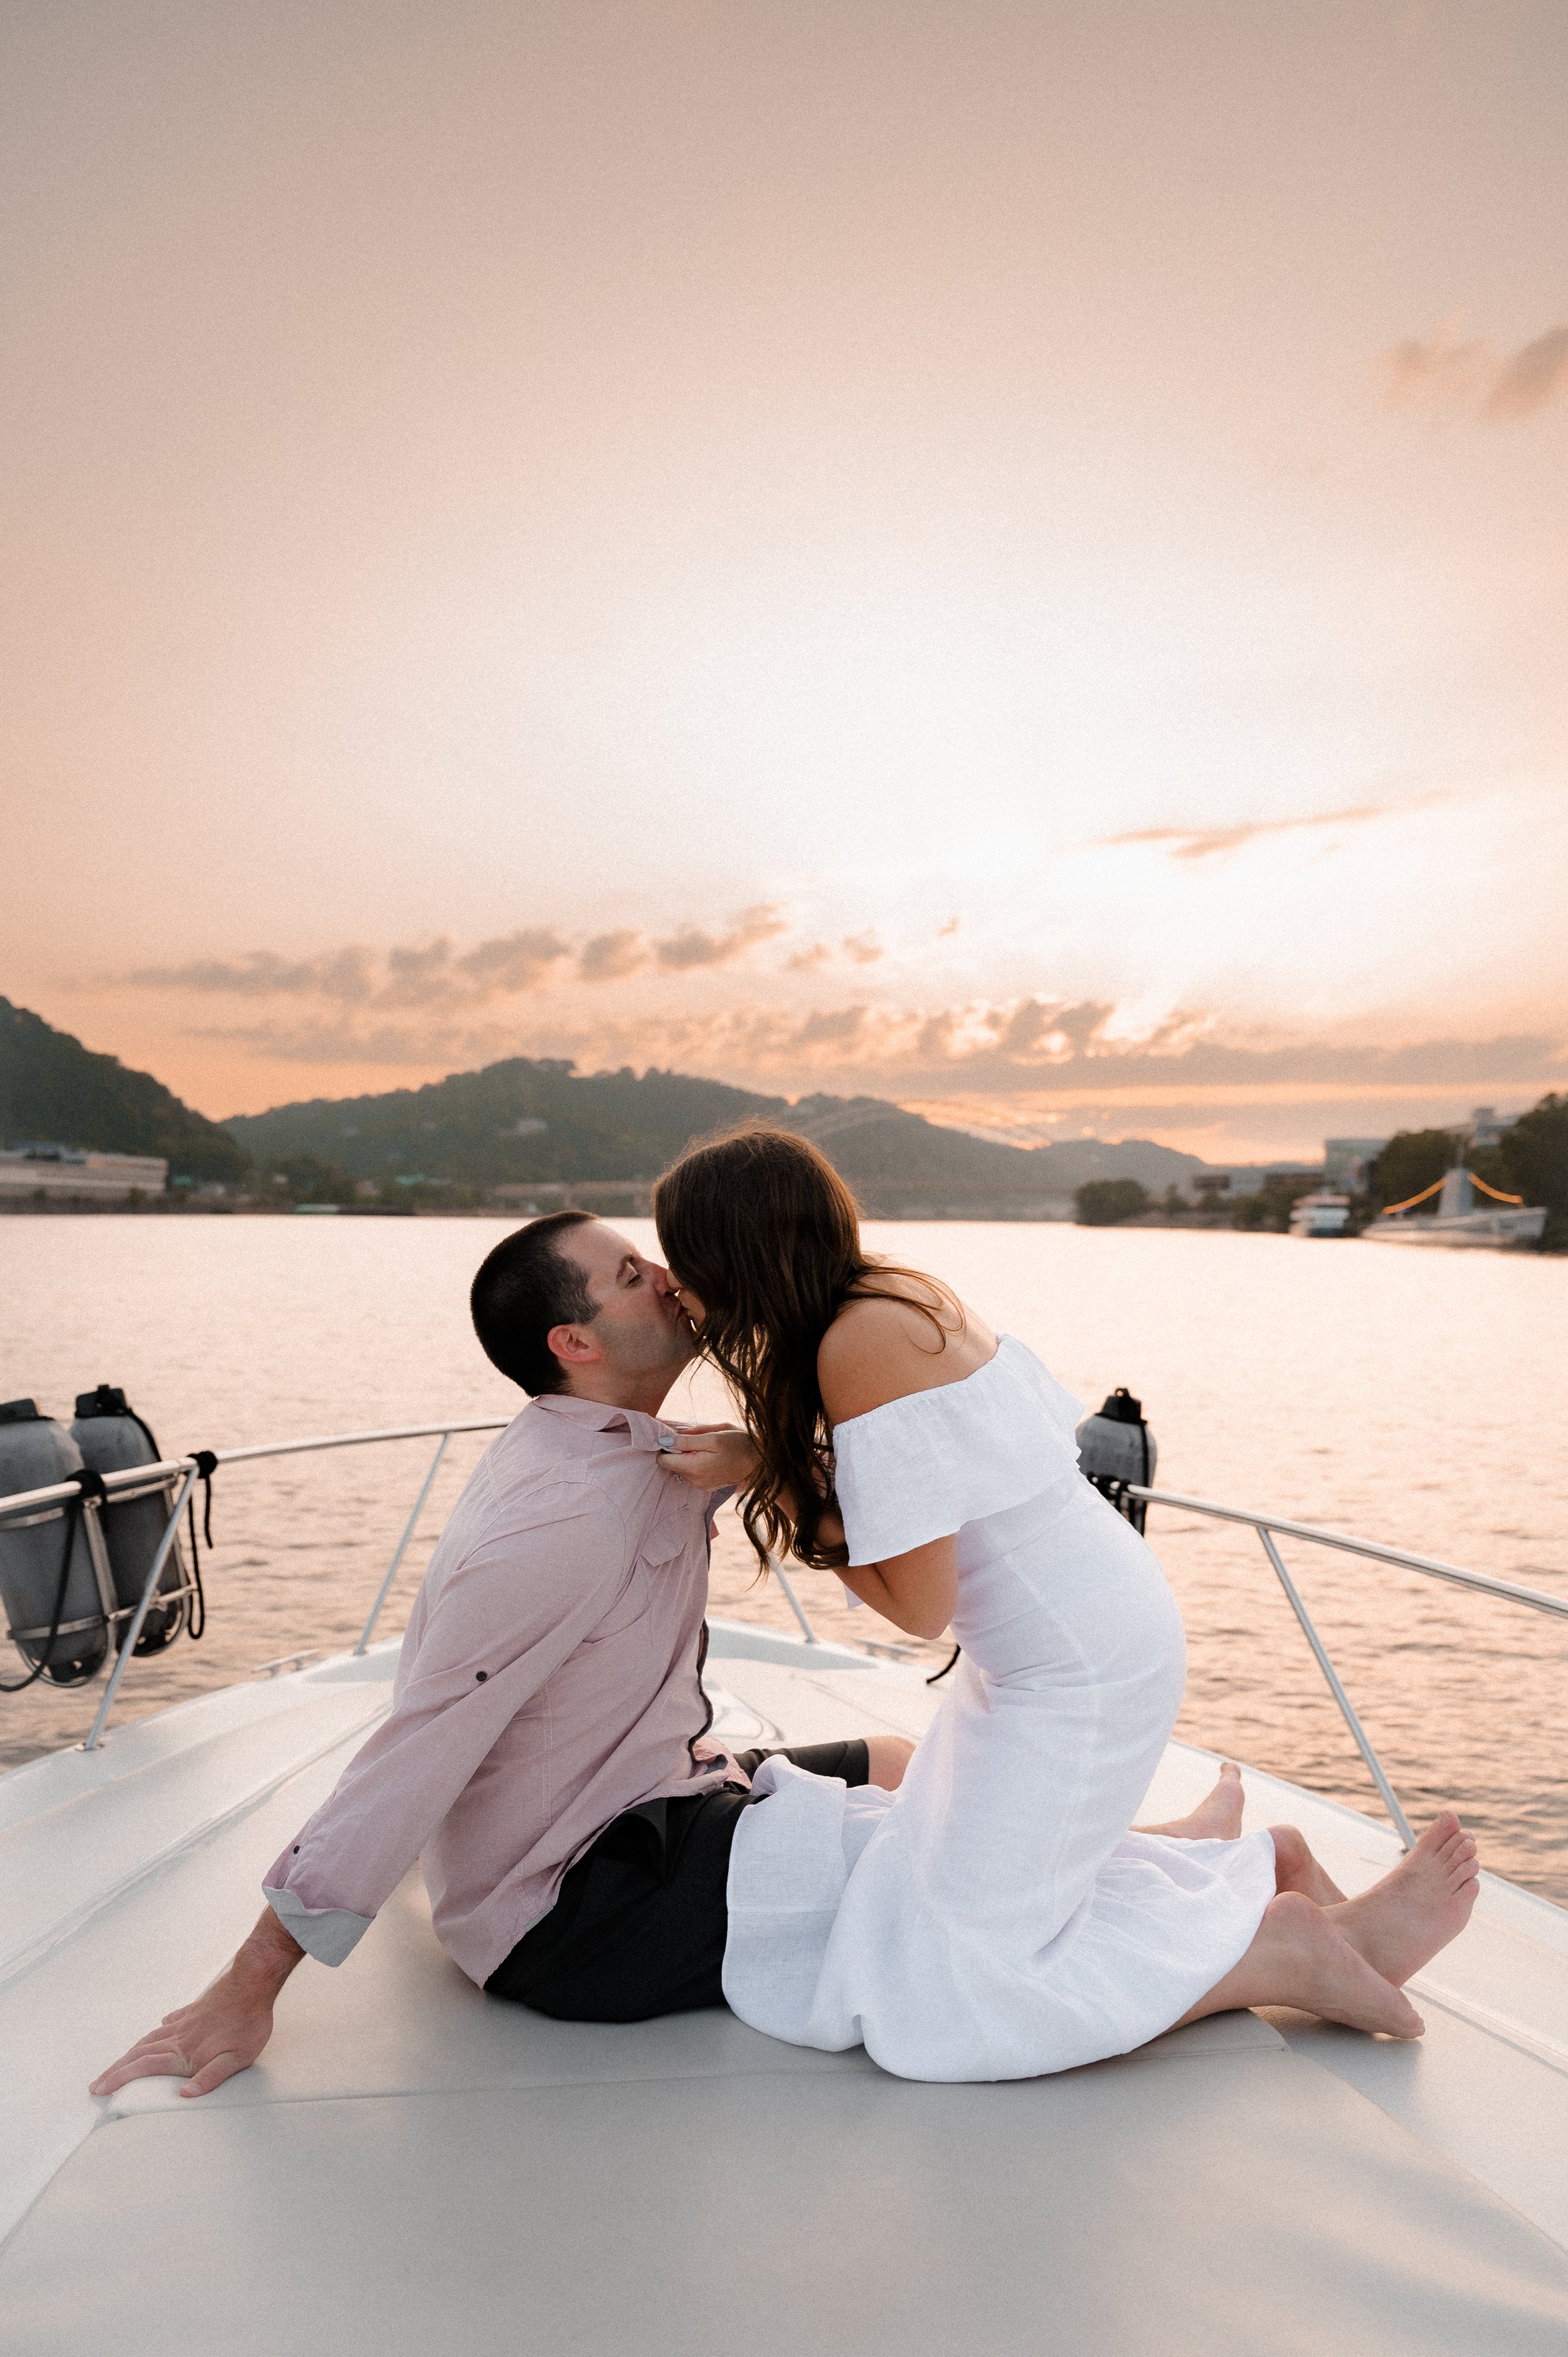 pittsburgh romantic boat down the river t engagement session art-5.jpg